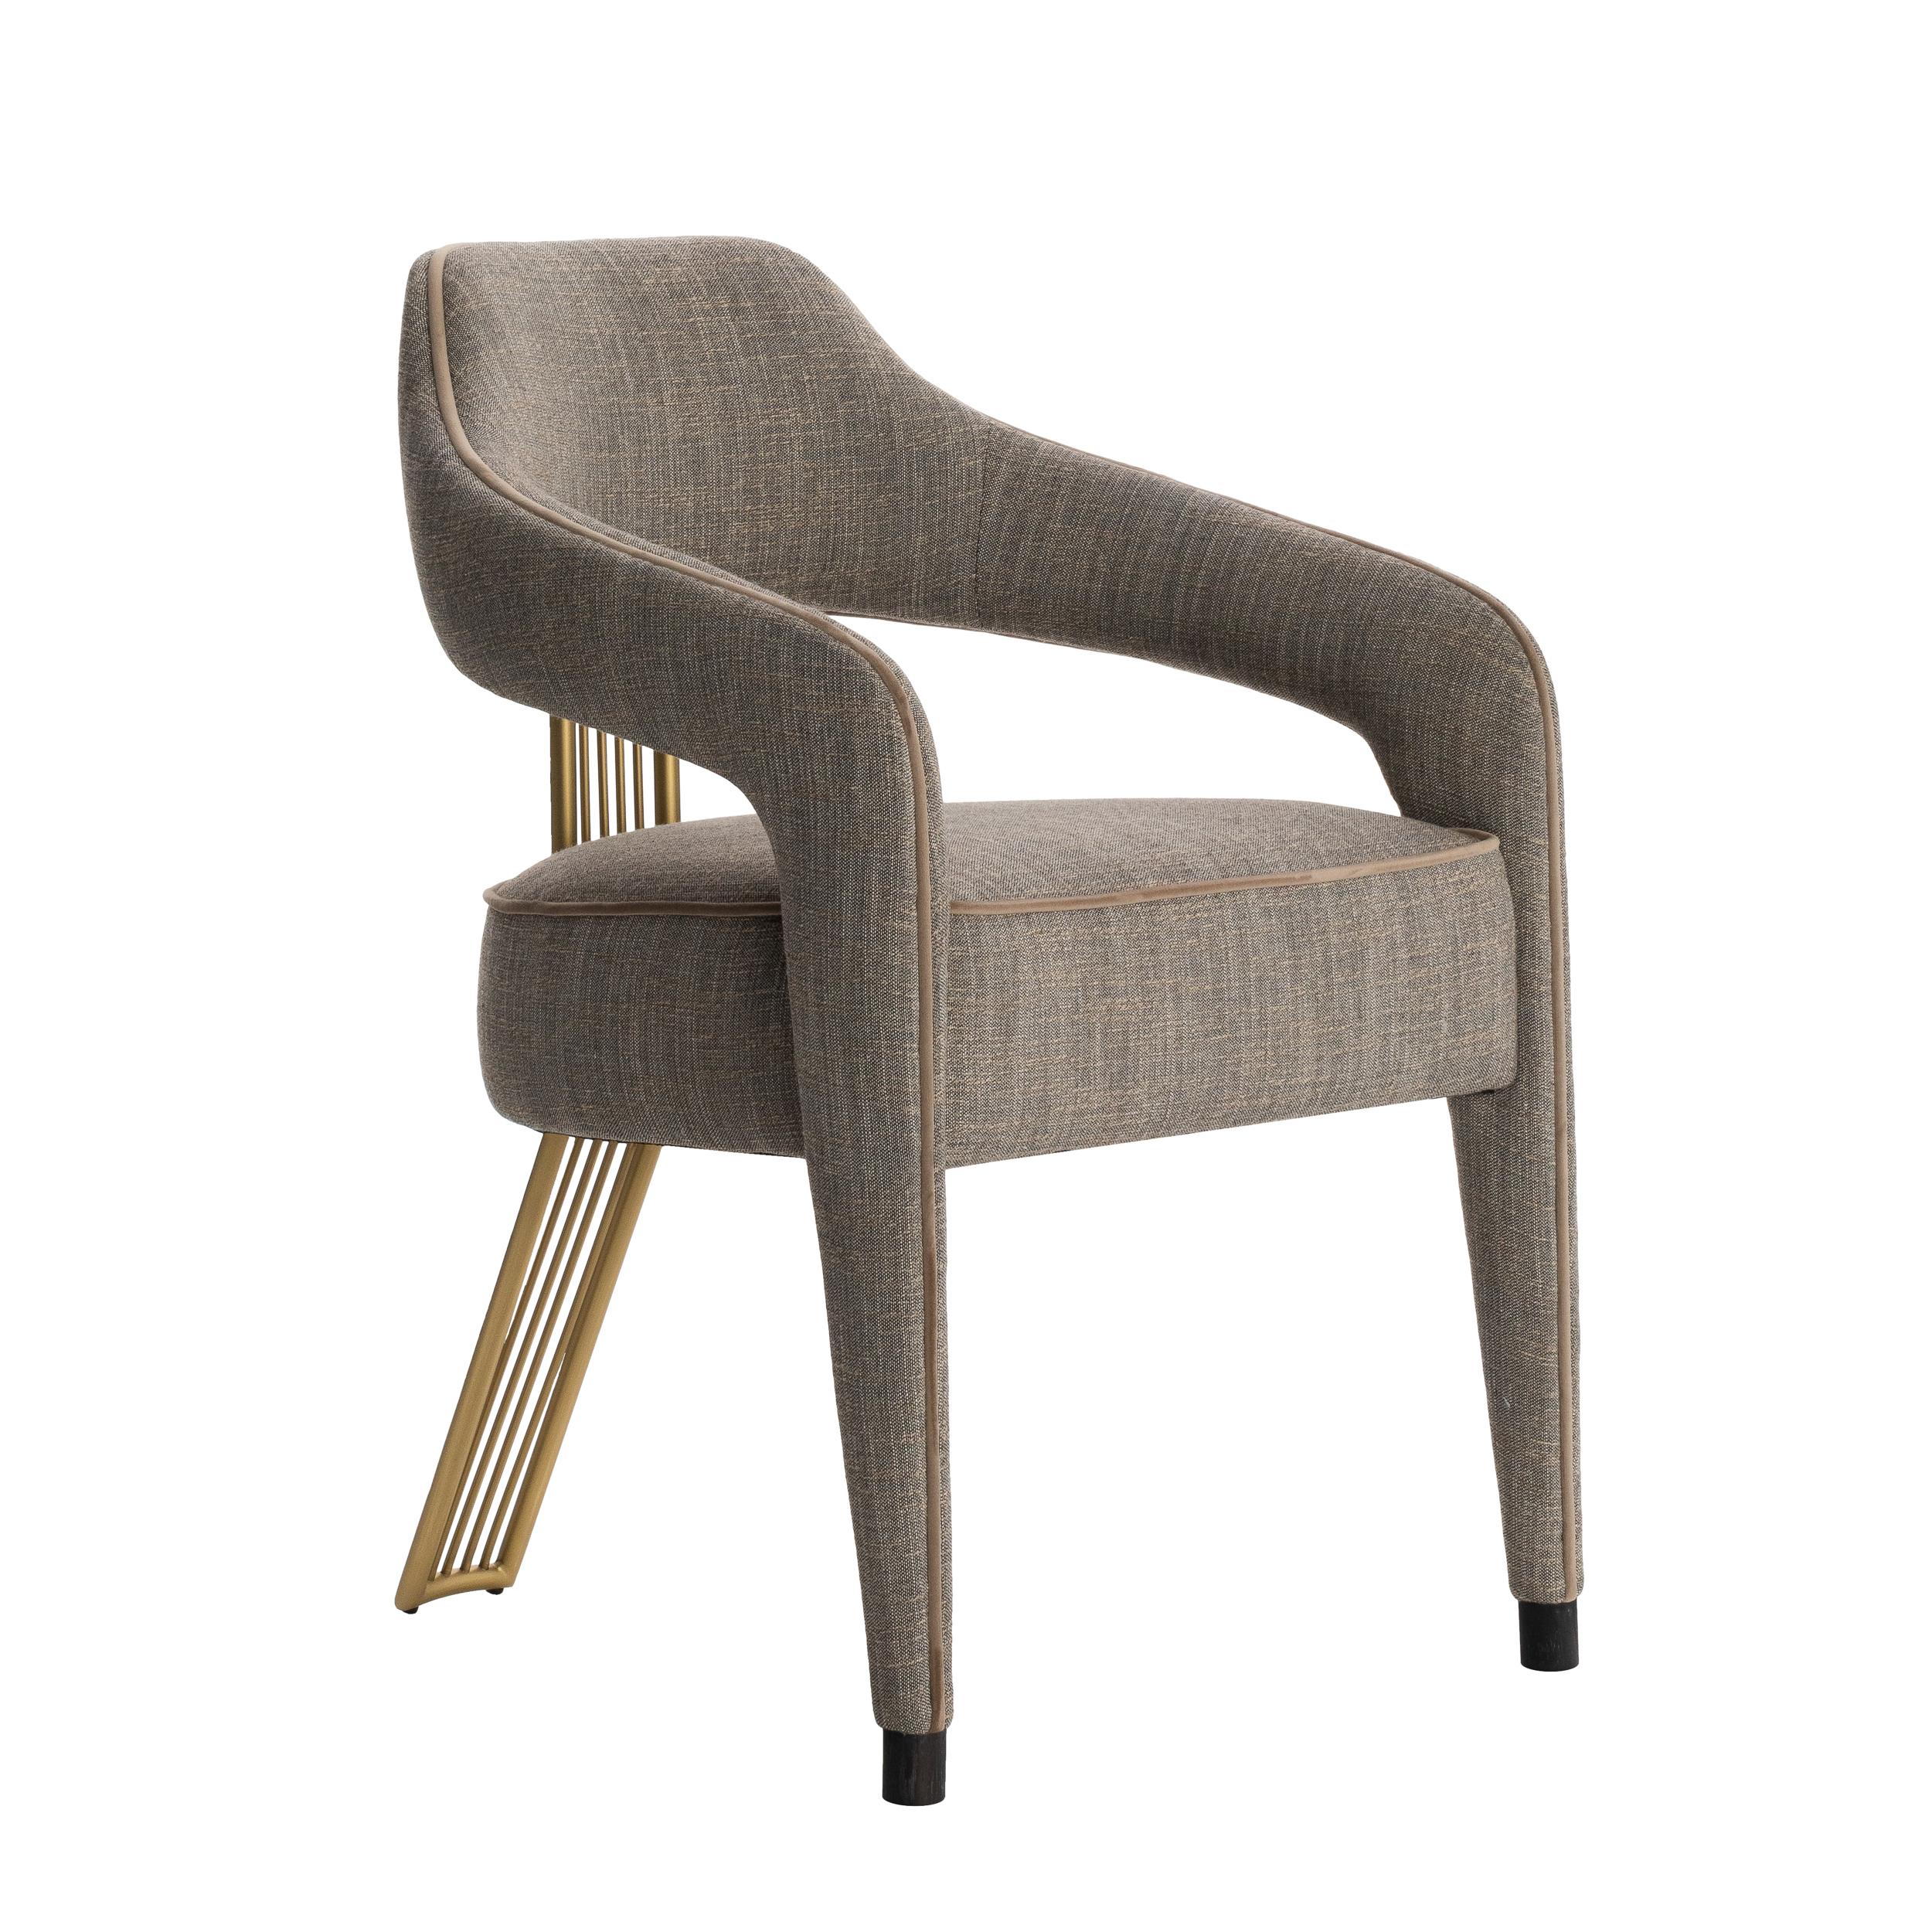 Our Invicta II dining chair has a unique and different design, with just one leg in the back, it gives your dining room a sophisticated and modern decor.
Beautiful contrasting piping details and the iron painted back foot in antique brass color